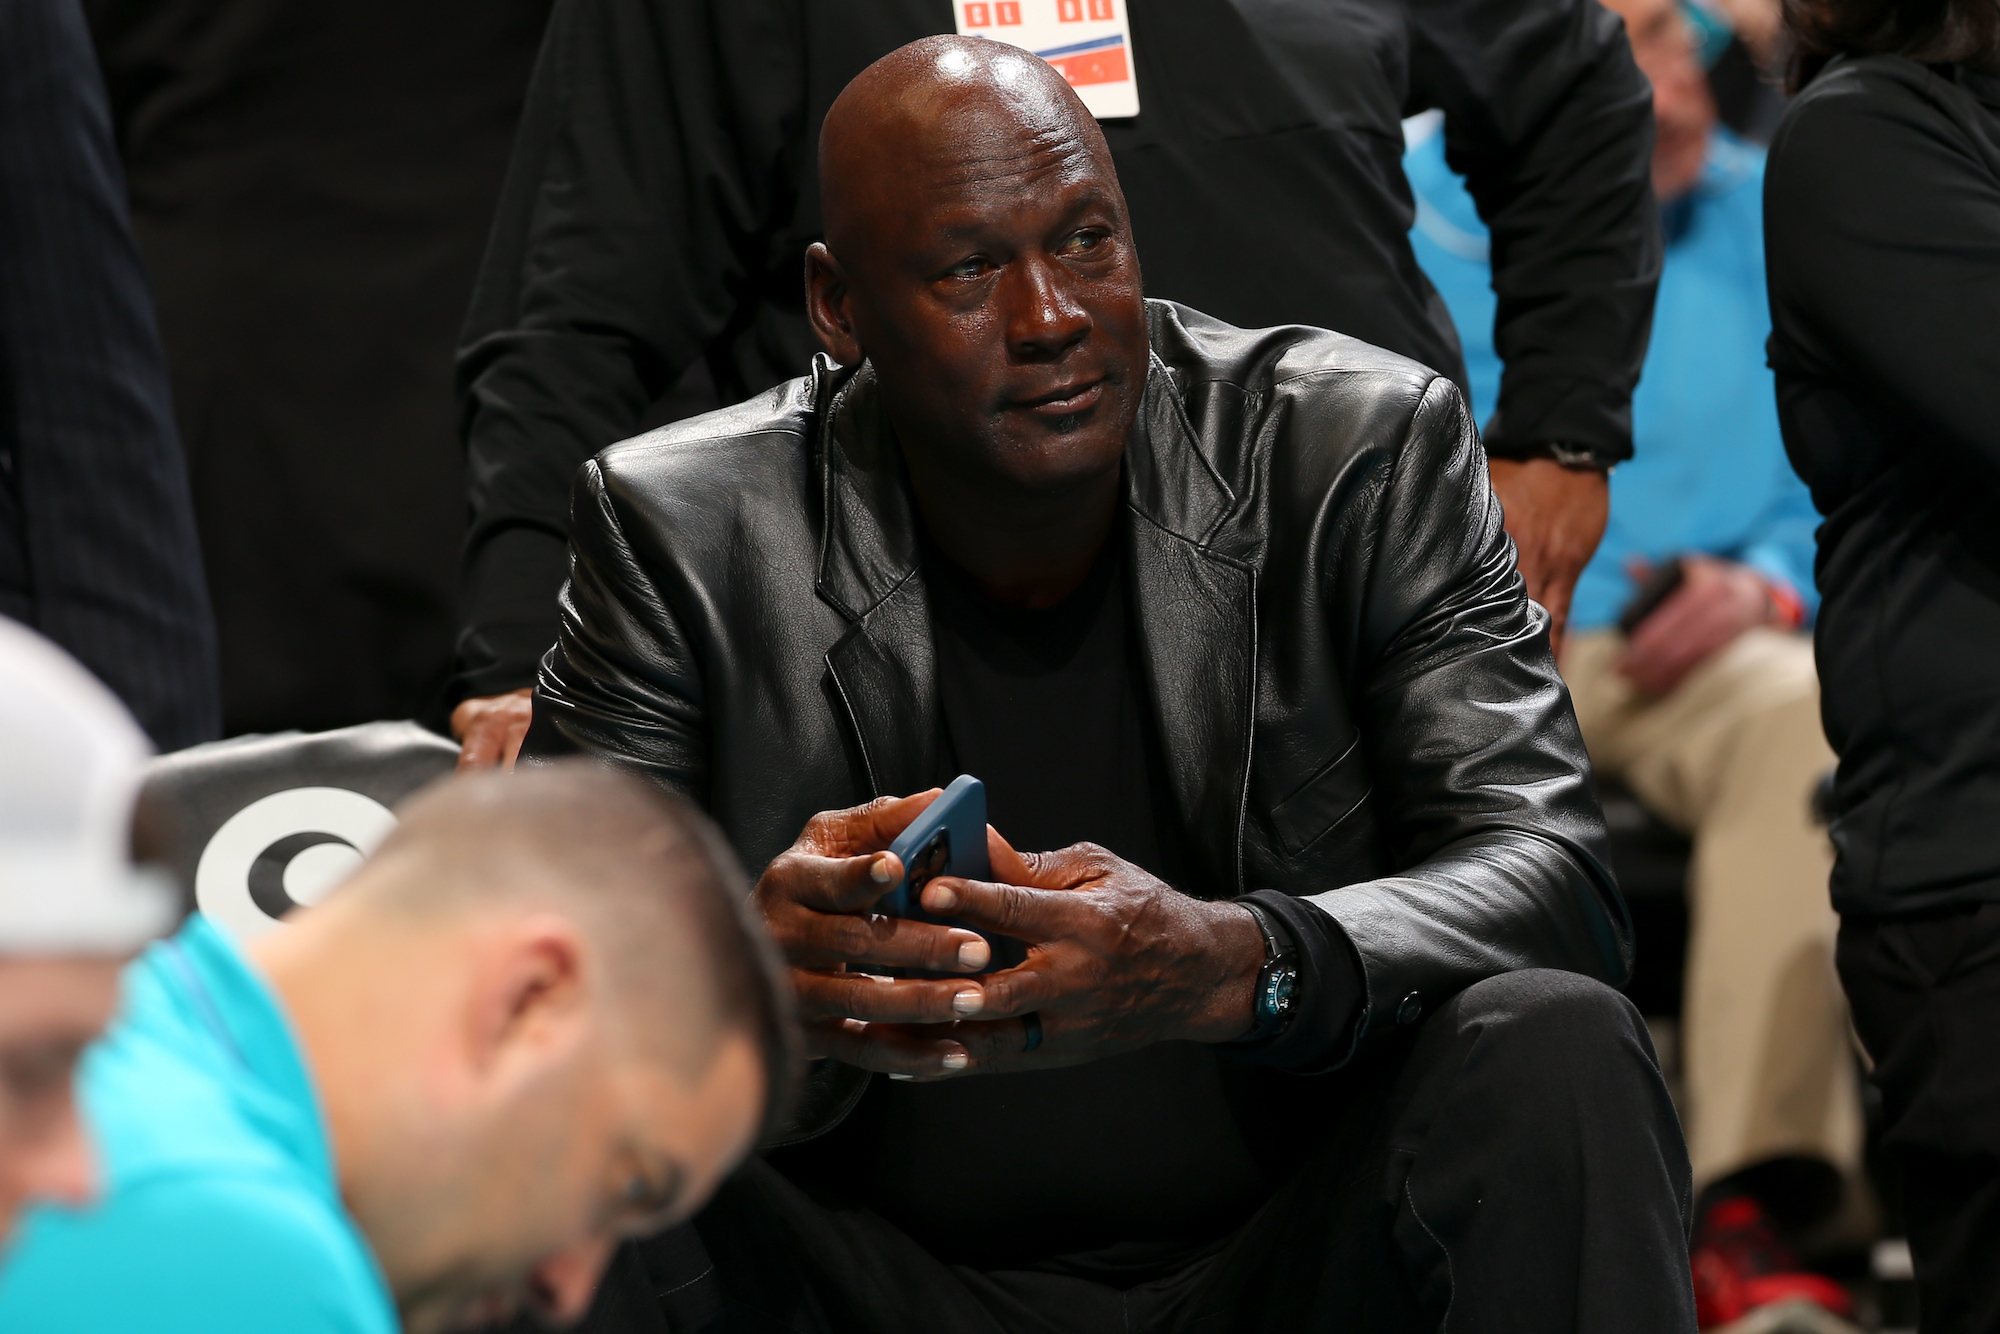 CHARLOTTE, NC - MARCH 1: Michael Jordan attends the game between the Orlando Magic and Charlotte Hornets on March 1, 2023 at Spectrum Center in Charlotte, North Carolina. NOTE TO USER: User expressly acknowledges and agrees that, by downloading and or using this photograph, User is consenting to the terms and conditions of the Getty Images License Agreement. Mandatory Copyright Notice: Copyright 2023 NBAE (Photo by Kent Smith/NBAE via Getty Images)